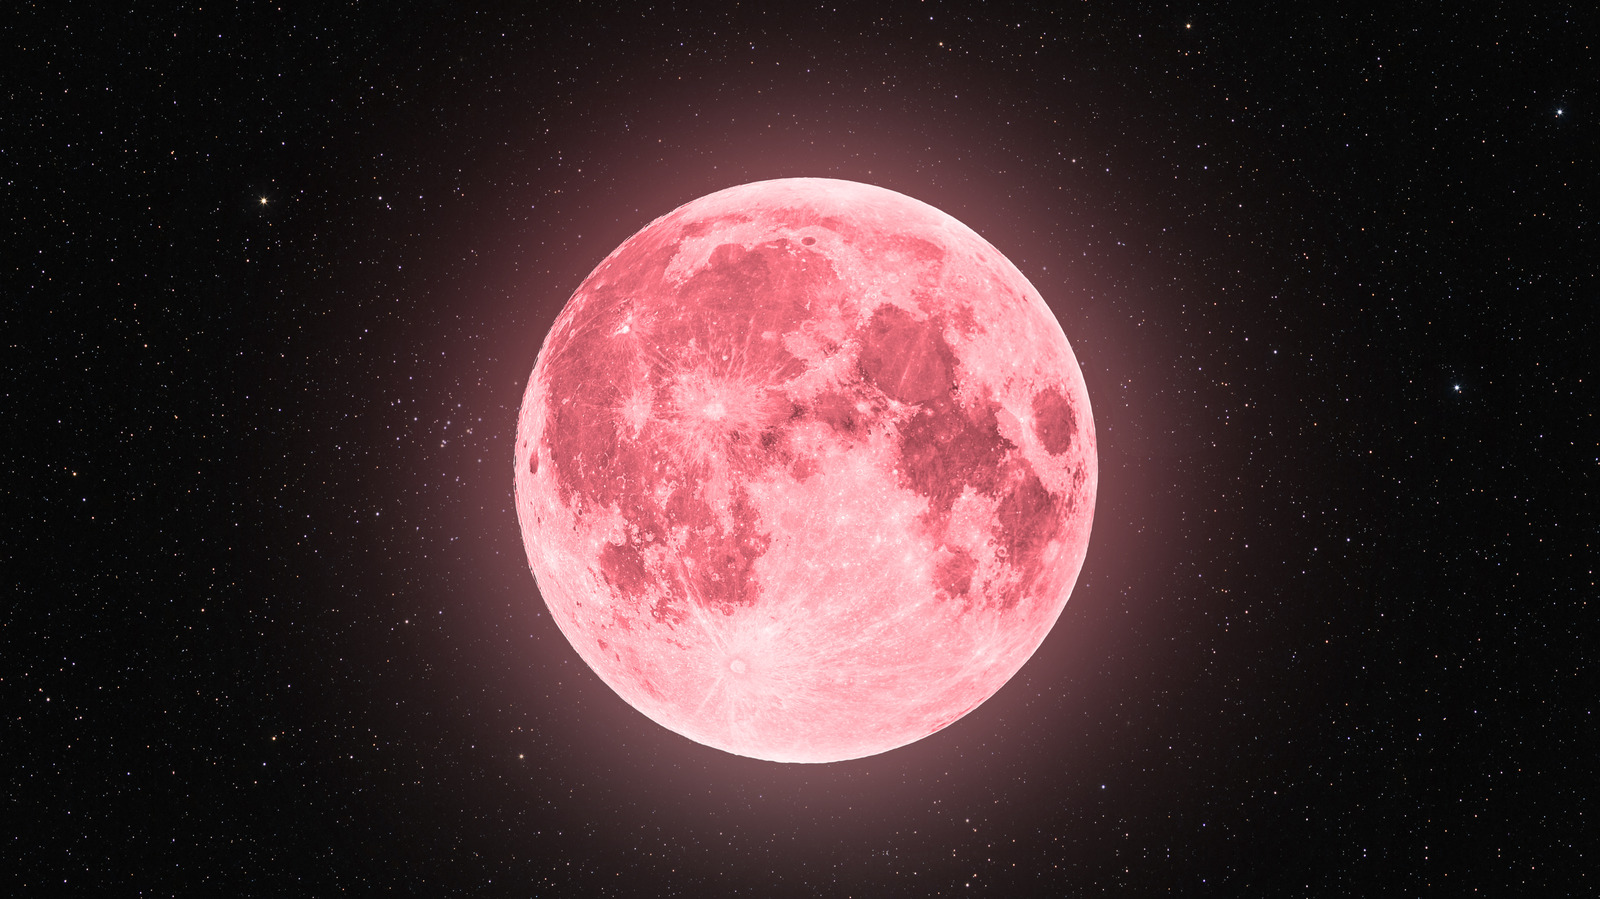 What Is A Strawberry Moon And How Does It Affect You?